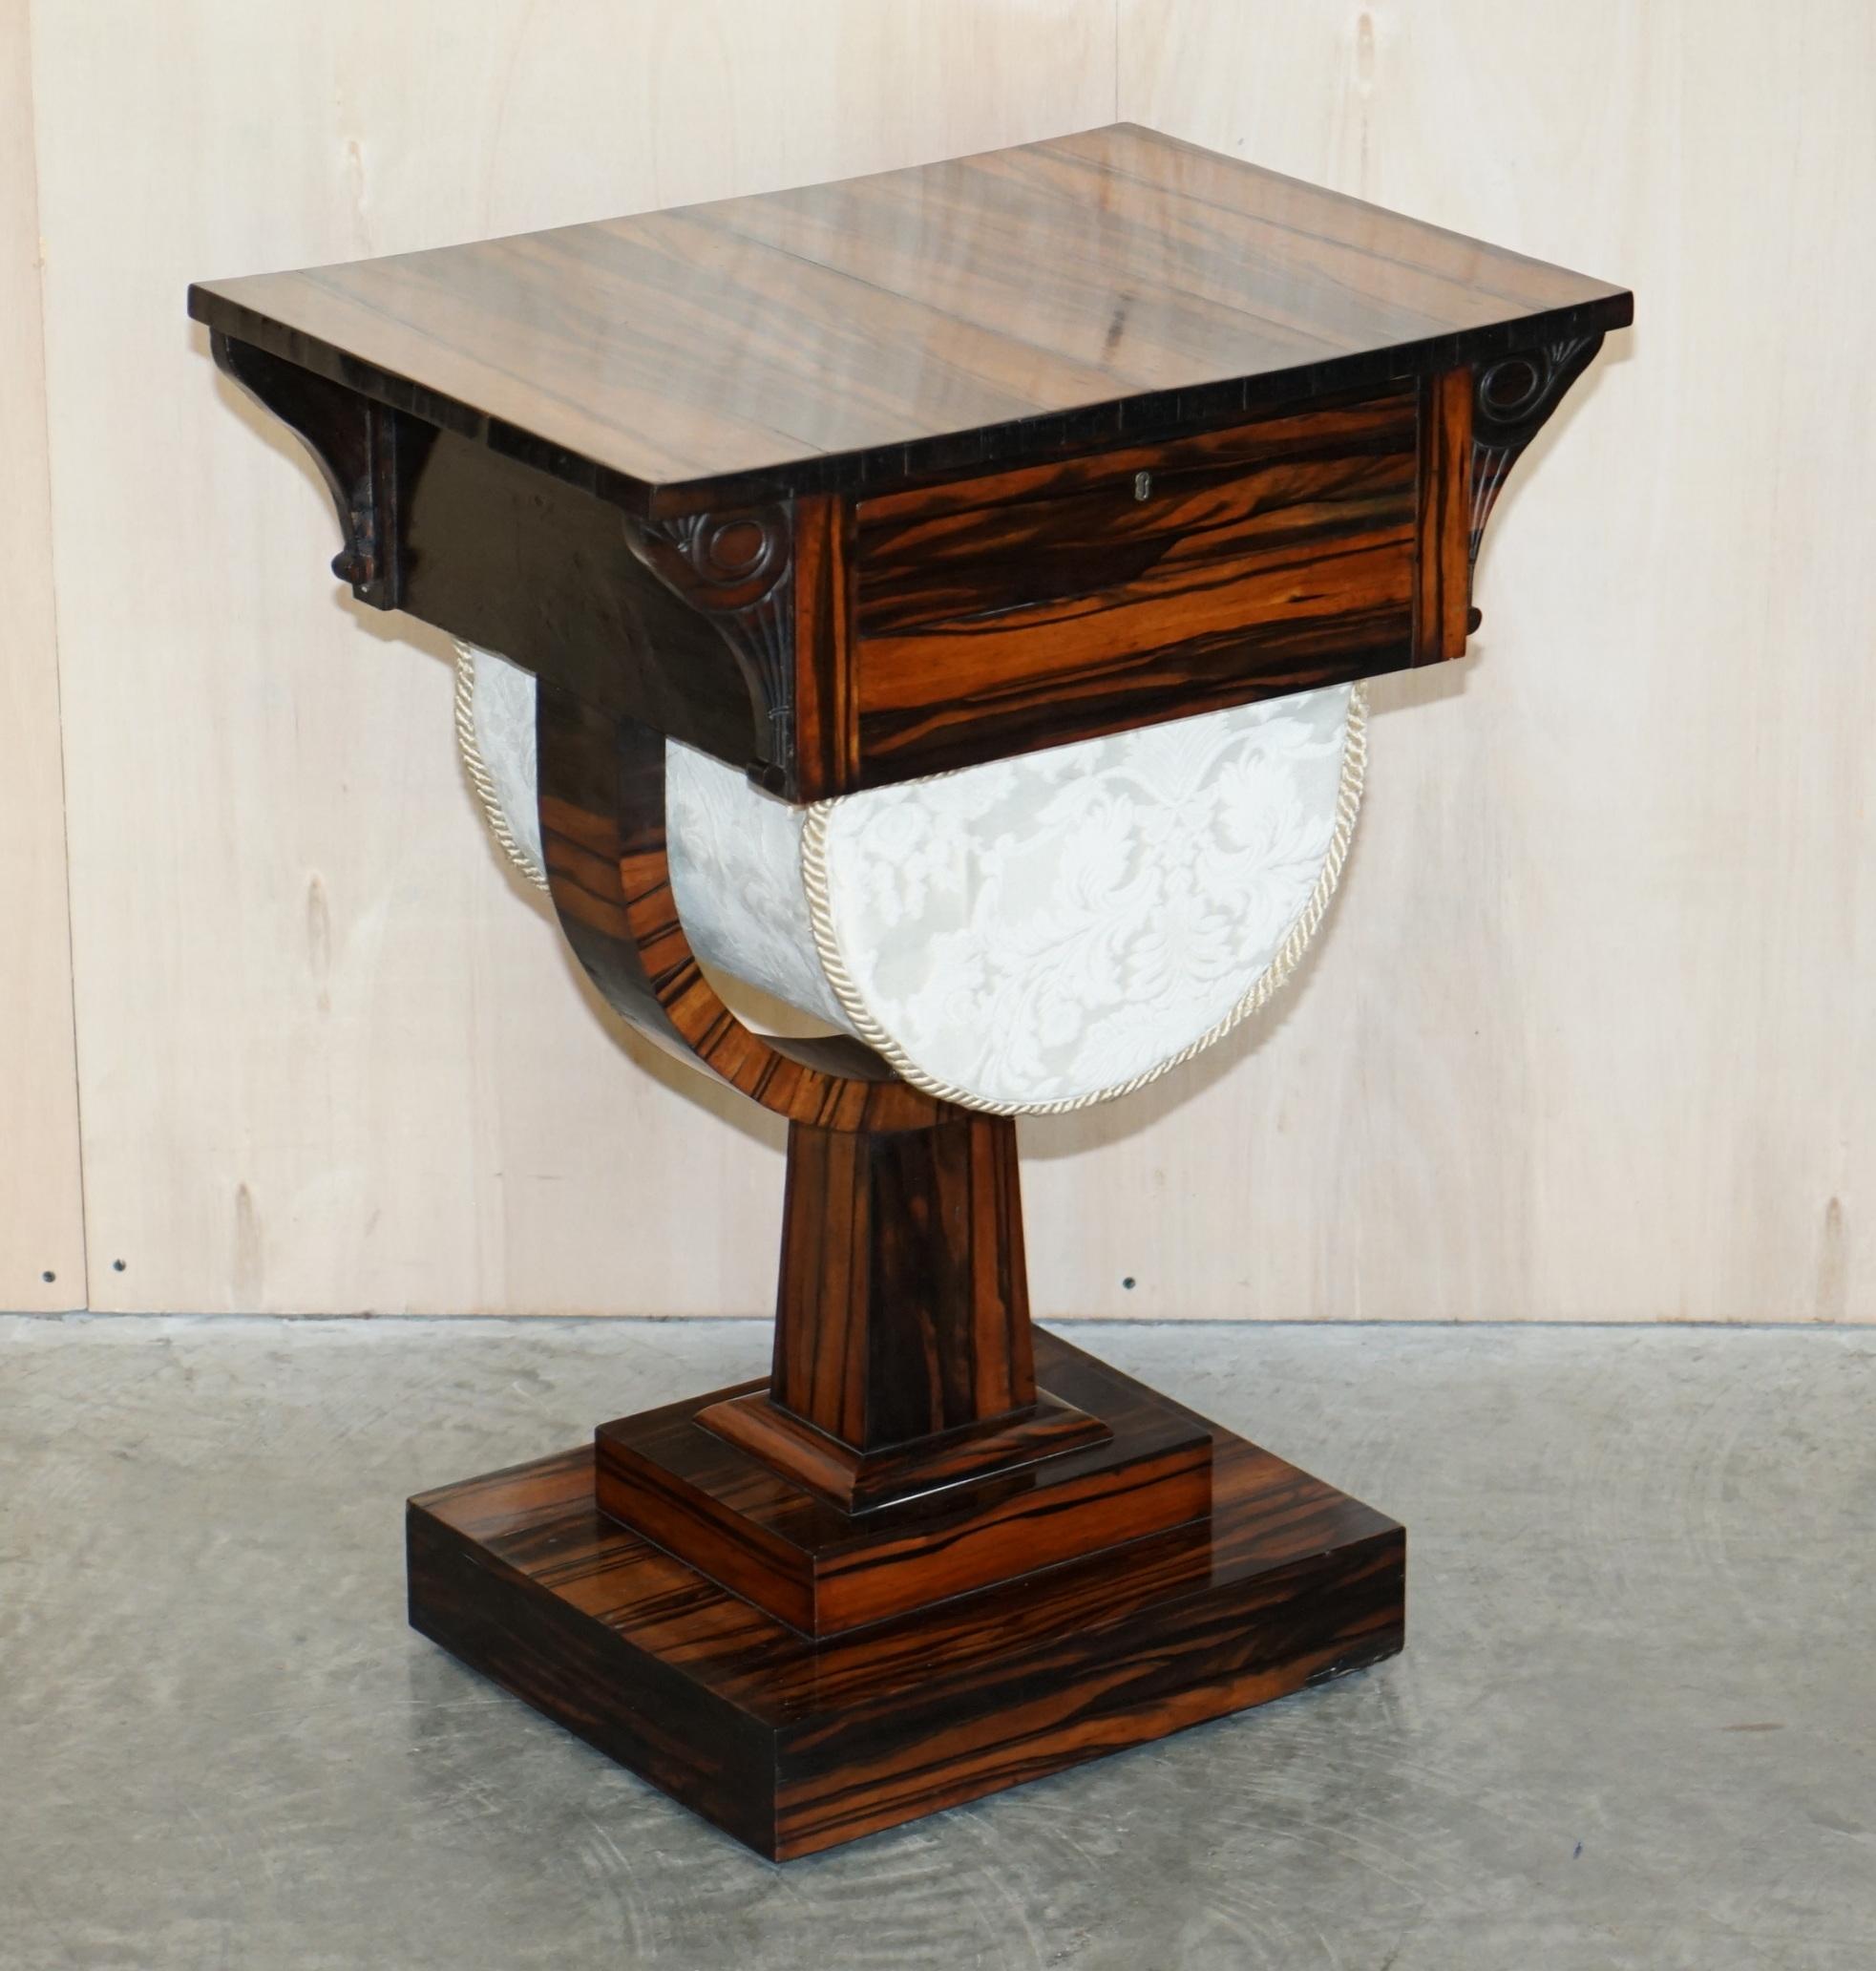 We are delighted to offer for sale this very fine, Regency circa 1810-1820 Coromandel work box / sewing table

This is pretty much the finest work table I have ever seen, it has been made in very rare and extremely expensive Coromandel wood which